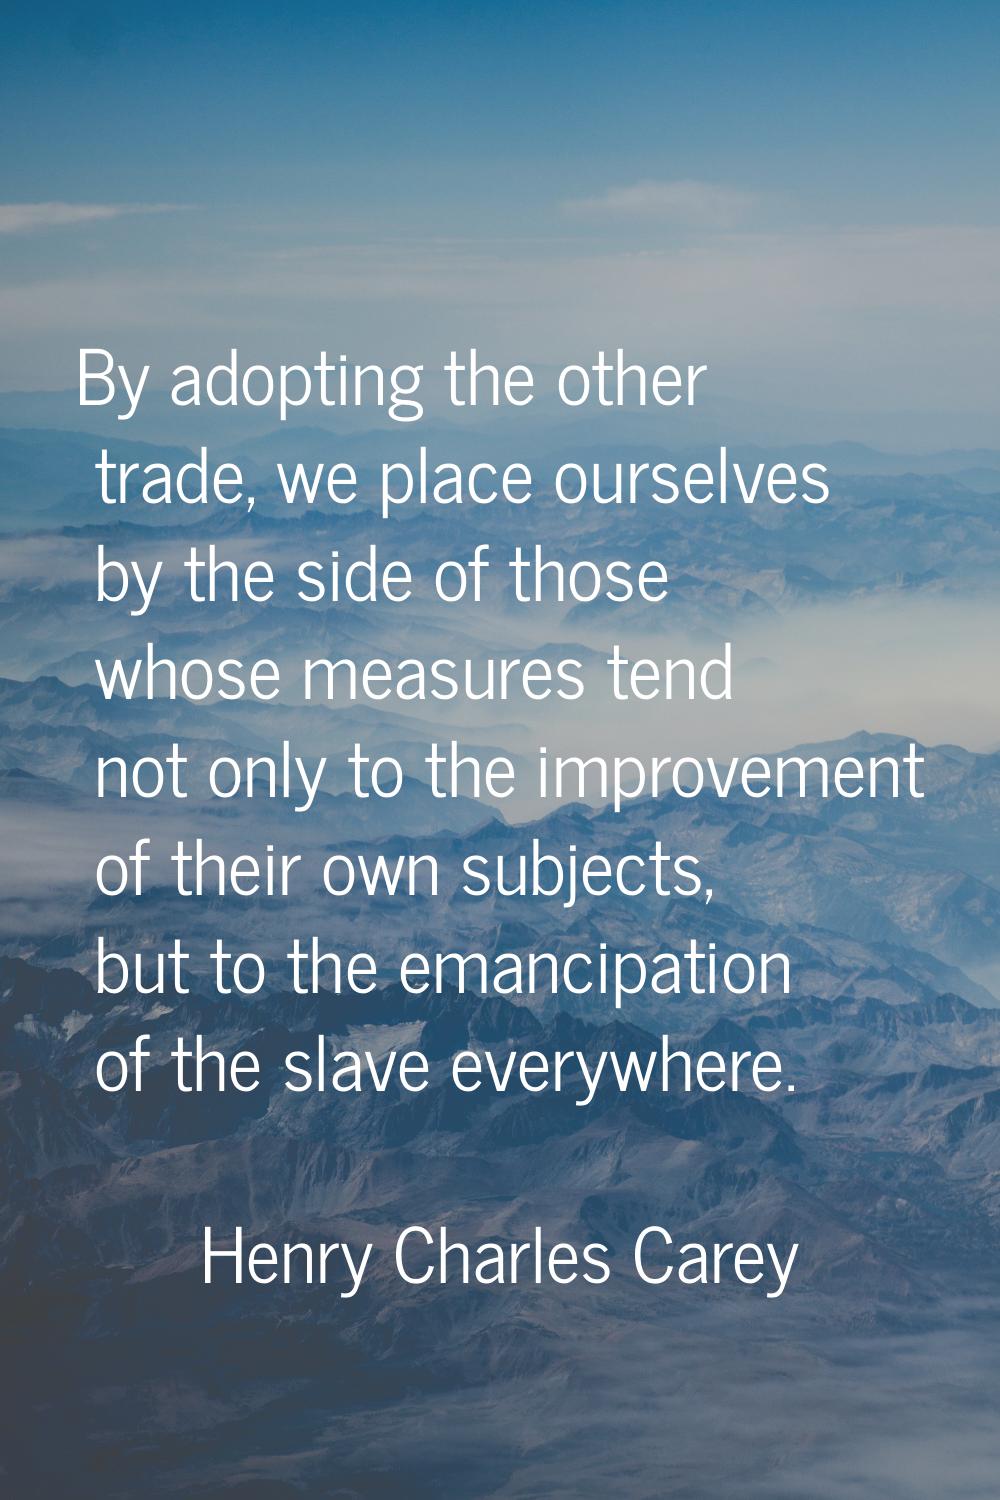 By adopting the other trade, we place ourselves by the side of those whose measures tend not only t